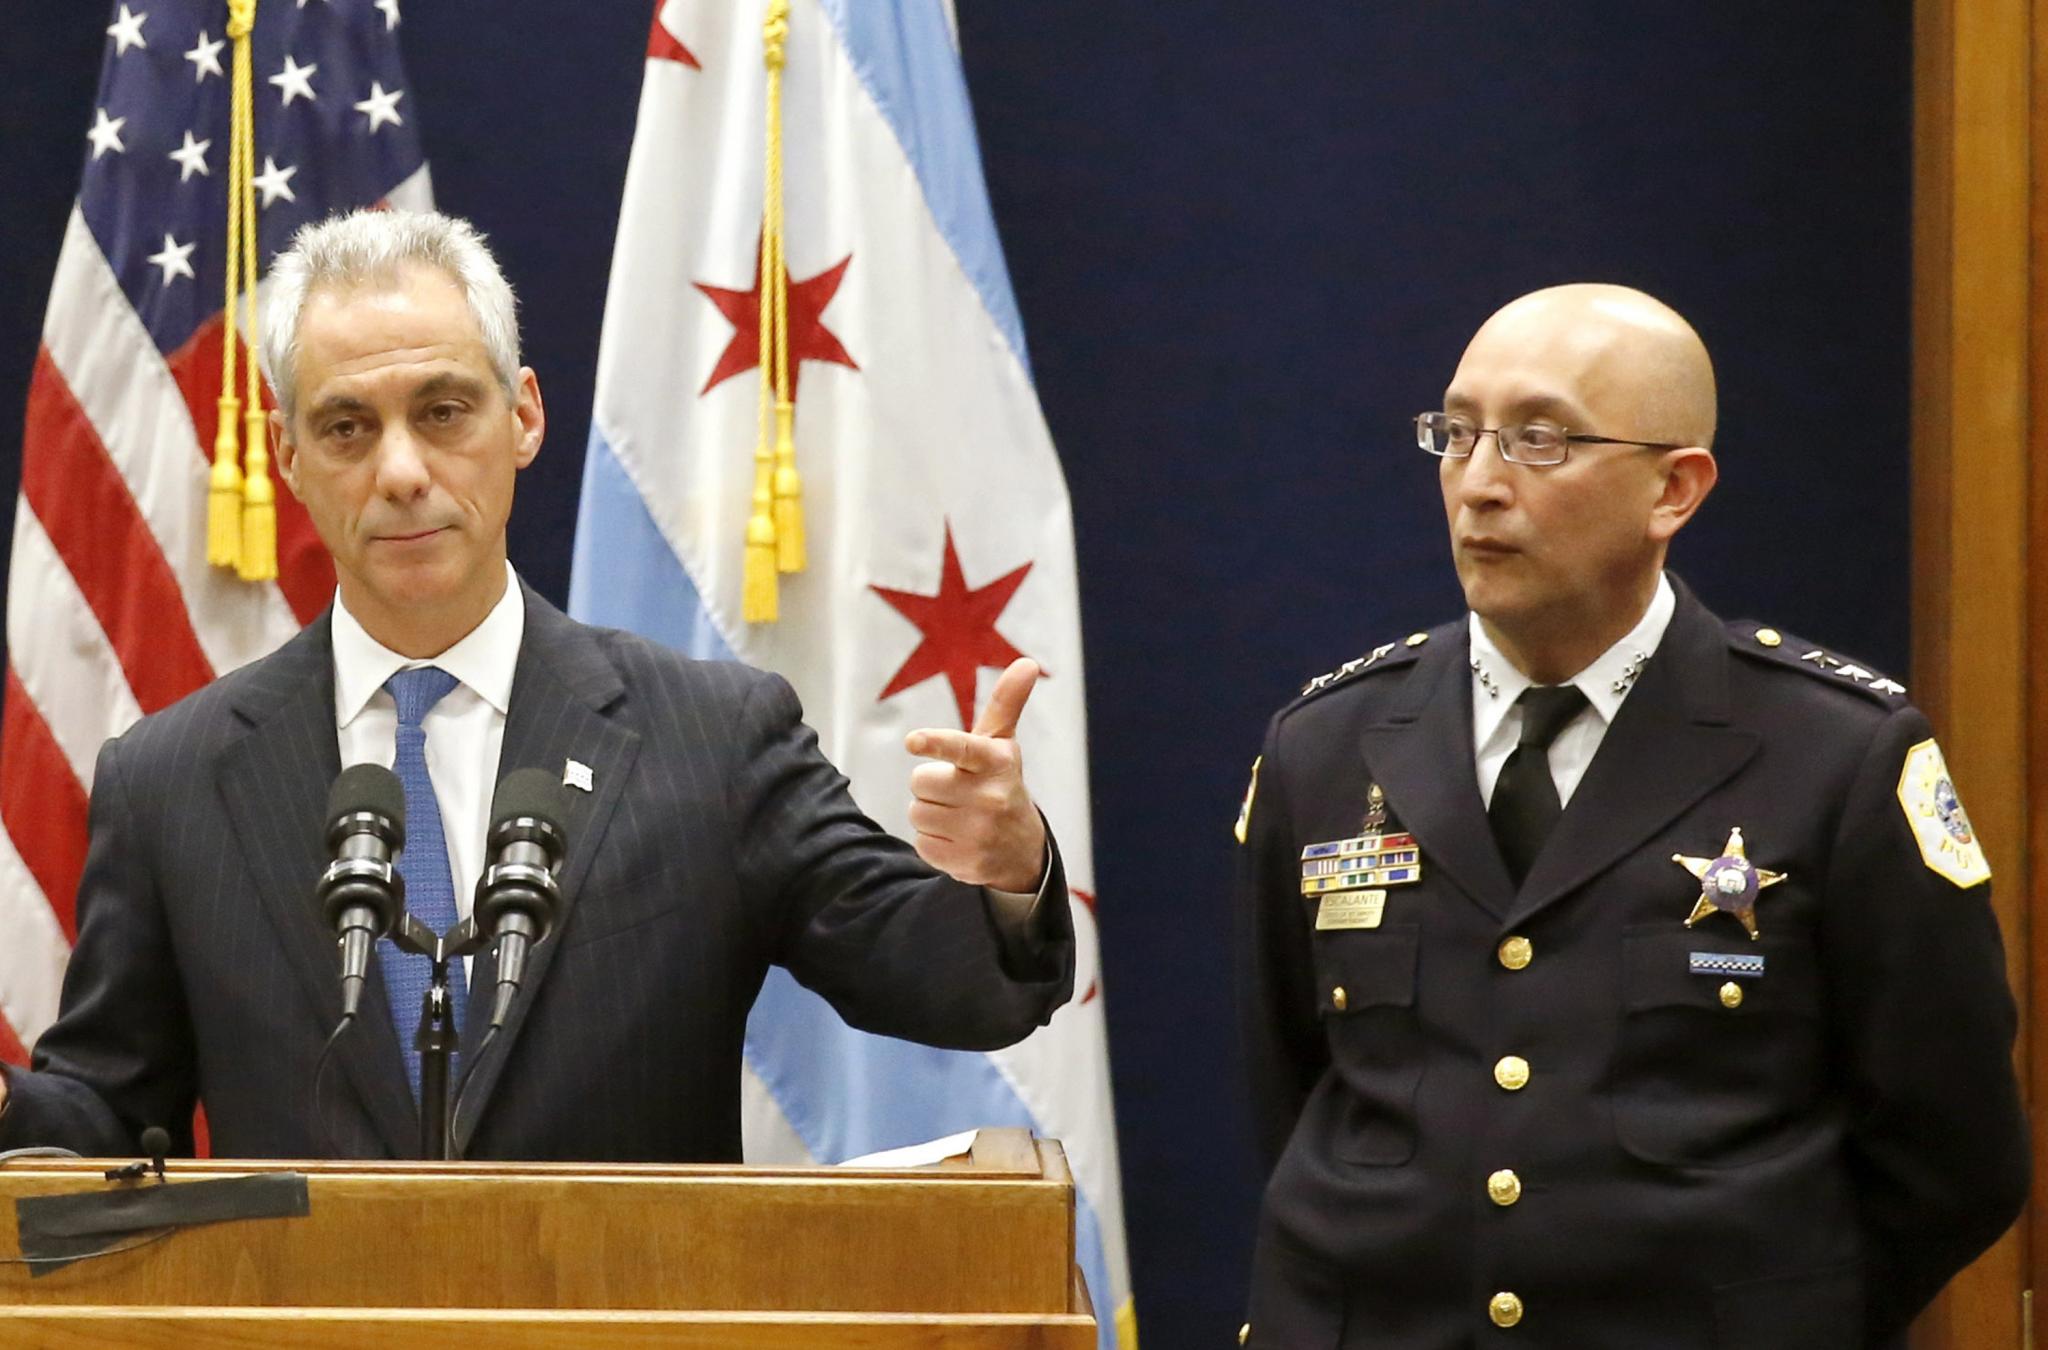 Rahm Emanuel Announces Training Reform Programs for Chicago Police Officers